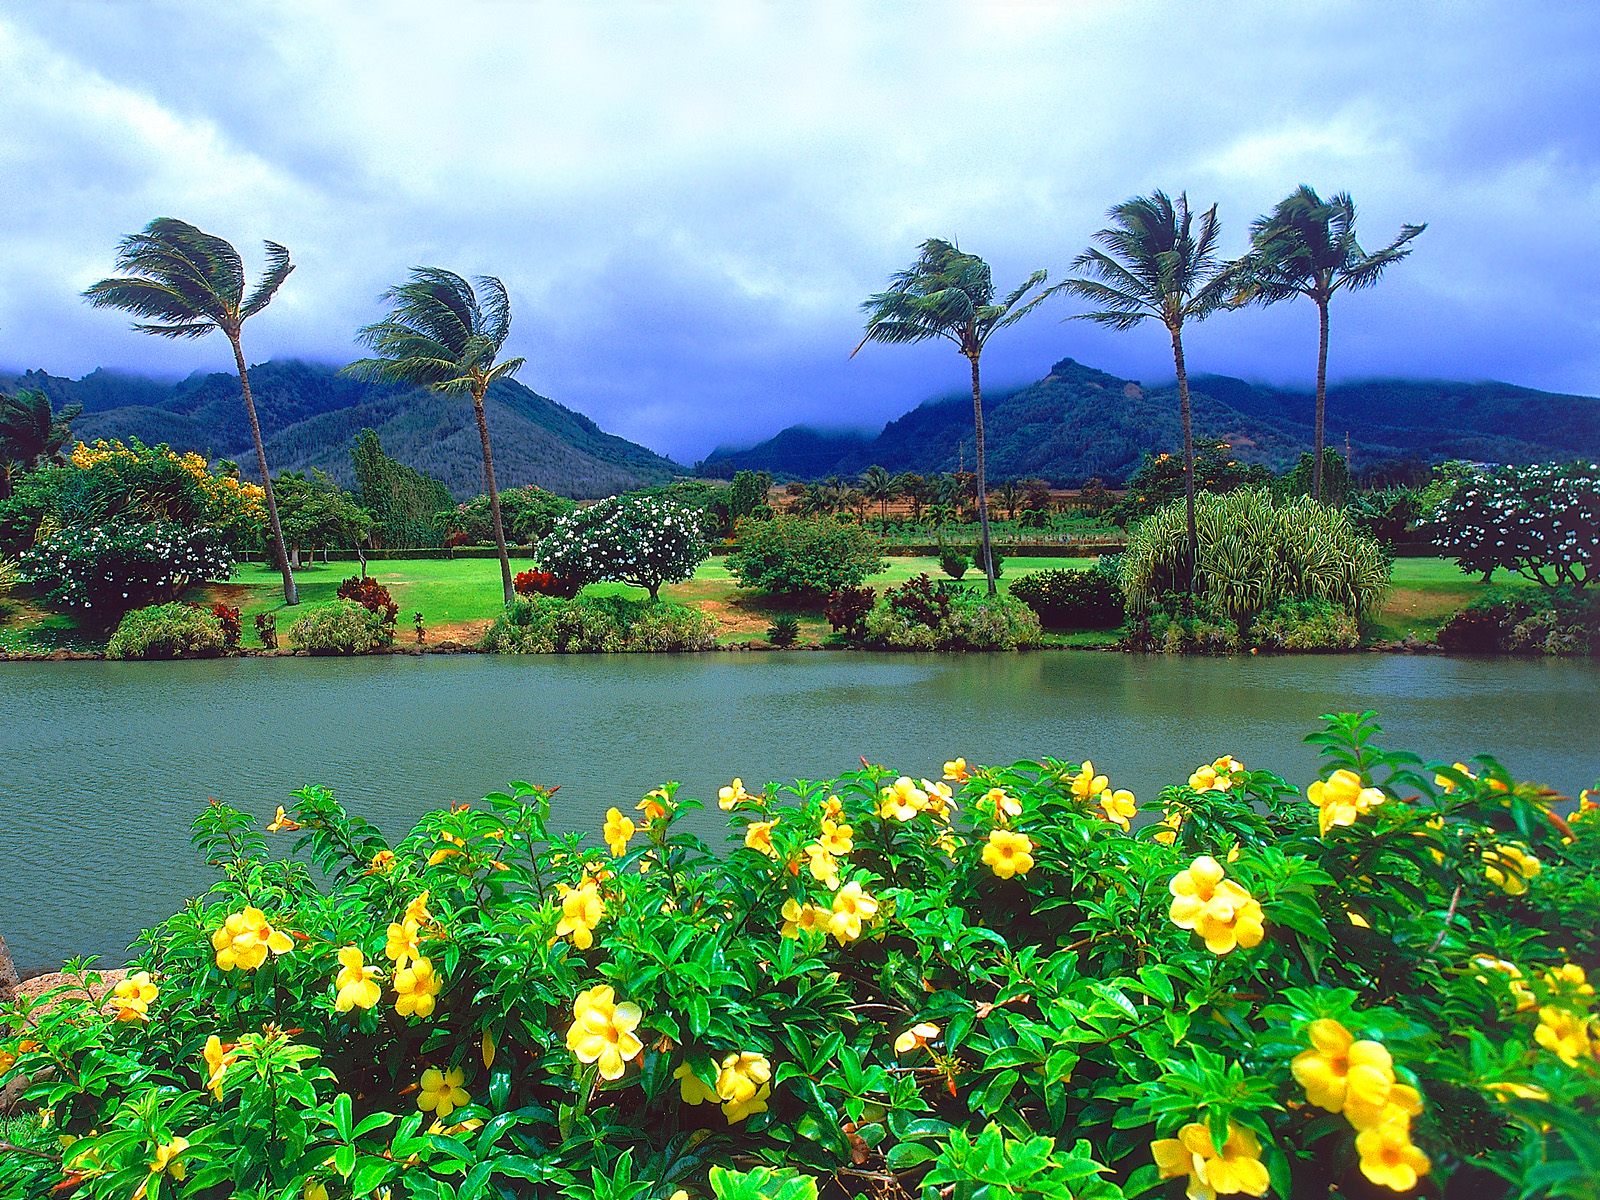 Download Maui Tropical Plantation Hawaii Wallpapers Pictures Photos